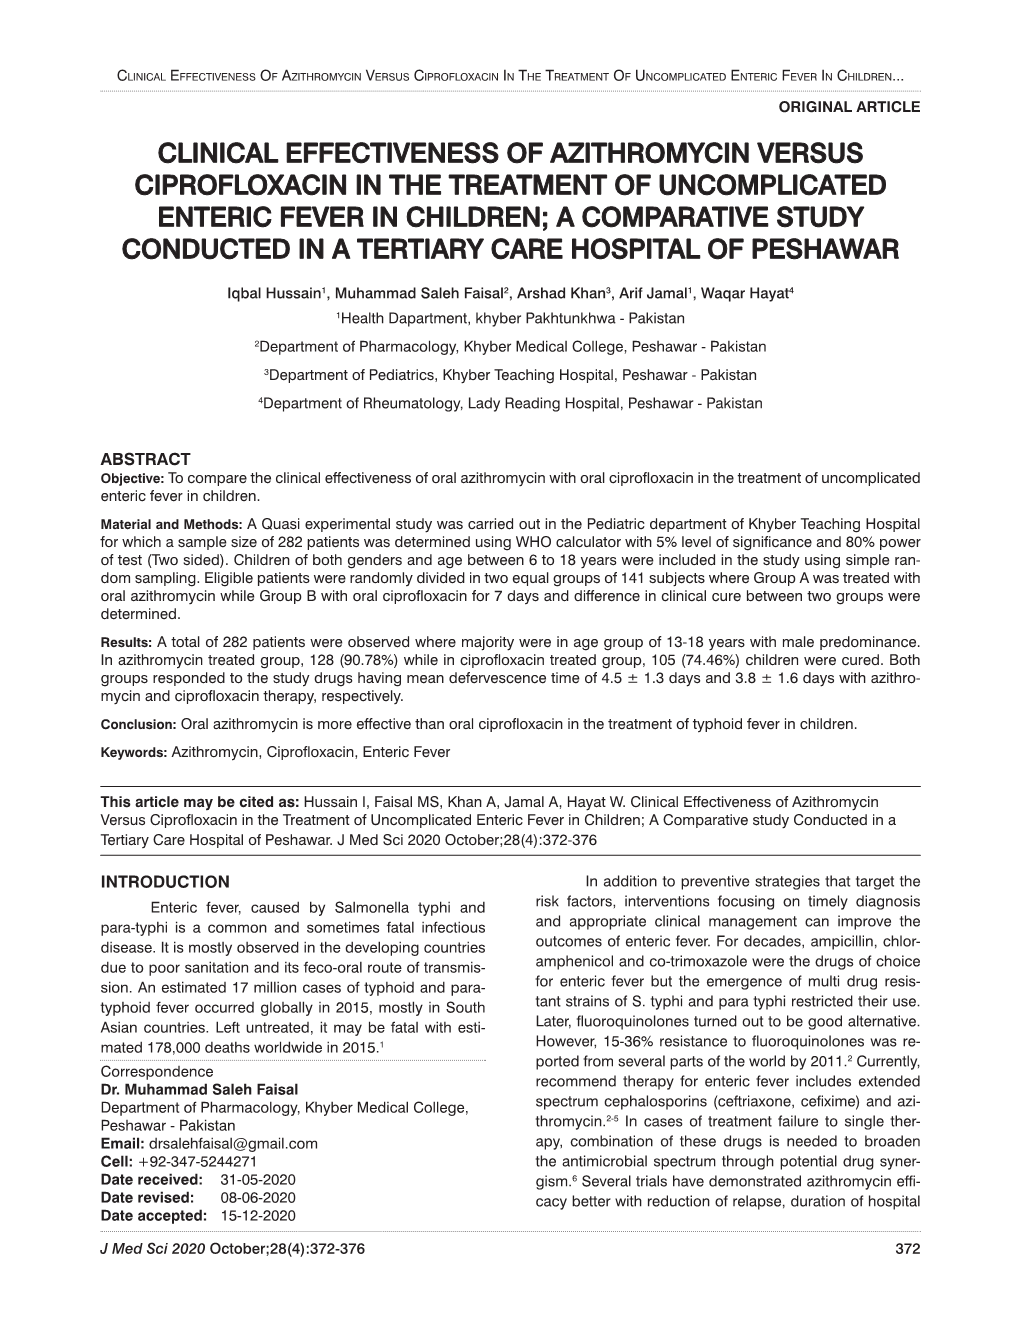 Clinical Effectiveness of Azithromycin Versus Ciprofloxacin in the Treatment of Uncomplicated Enteric Fever in Children